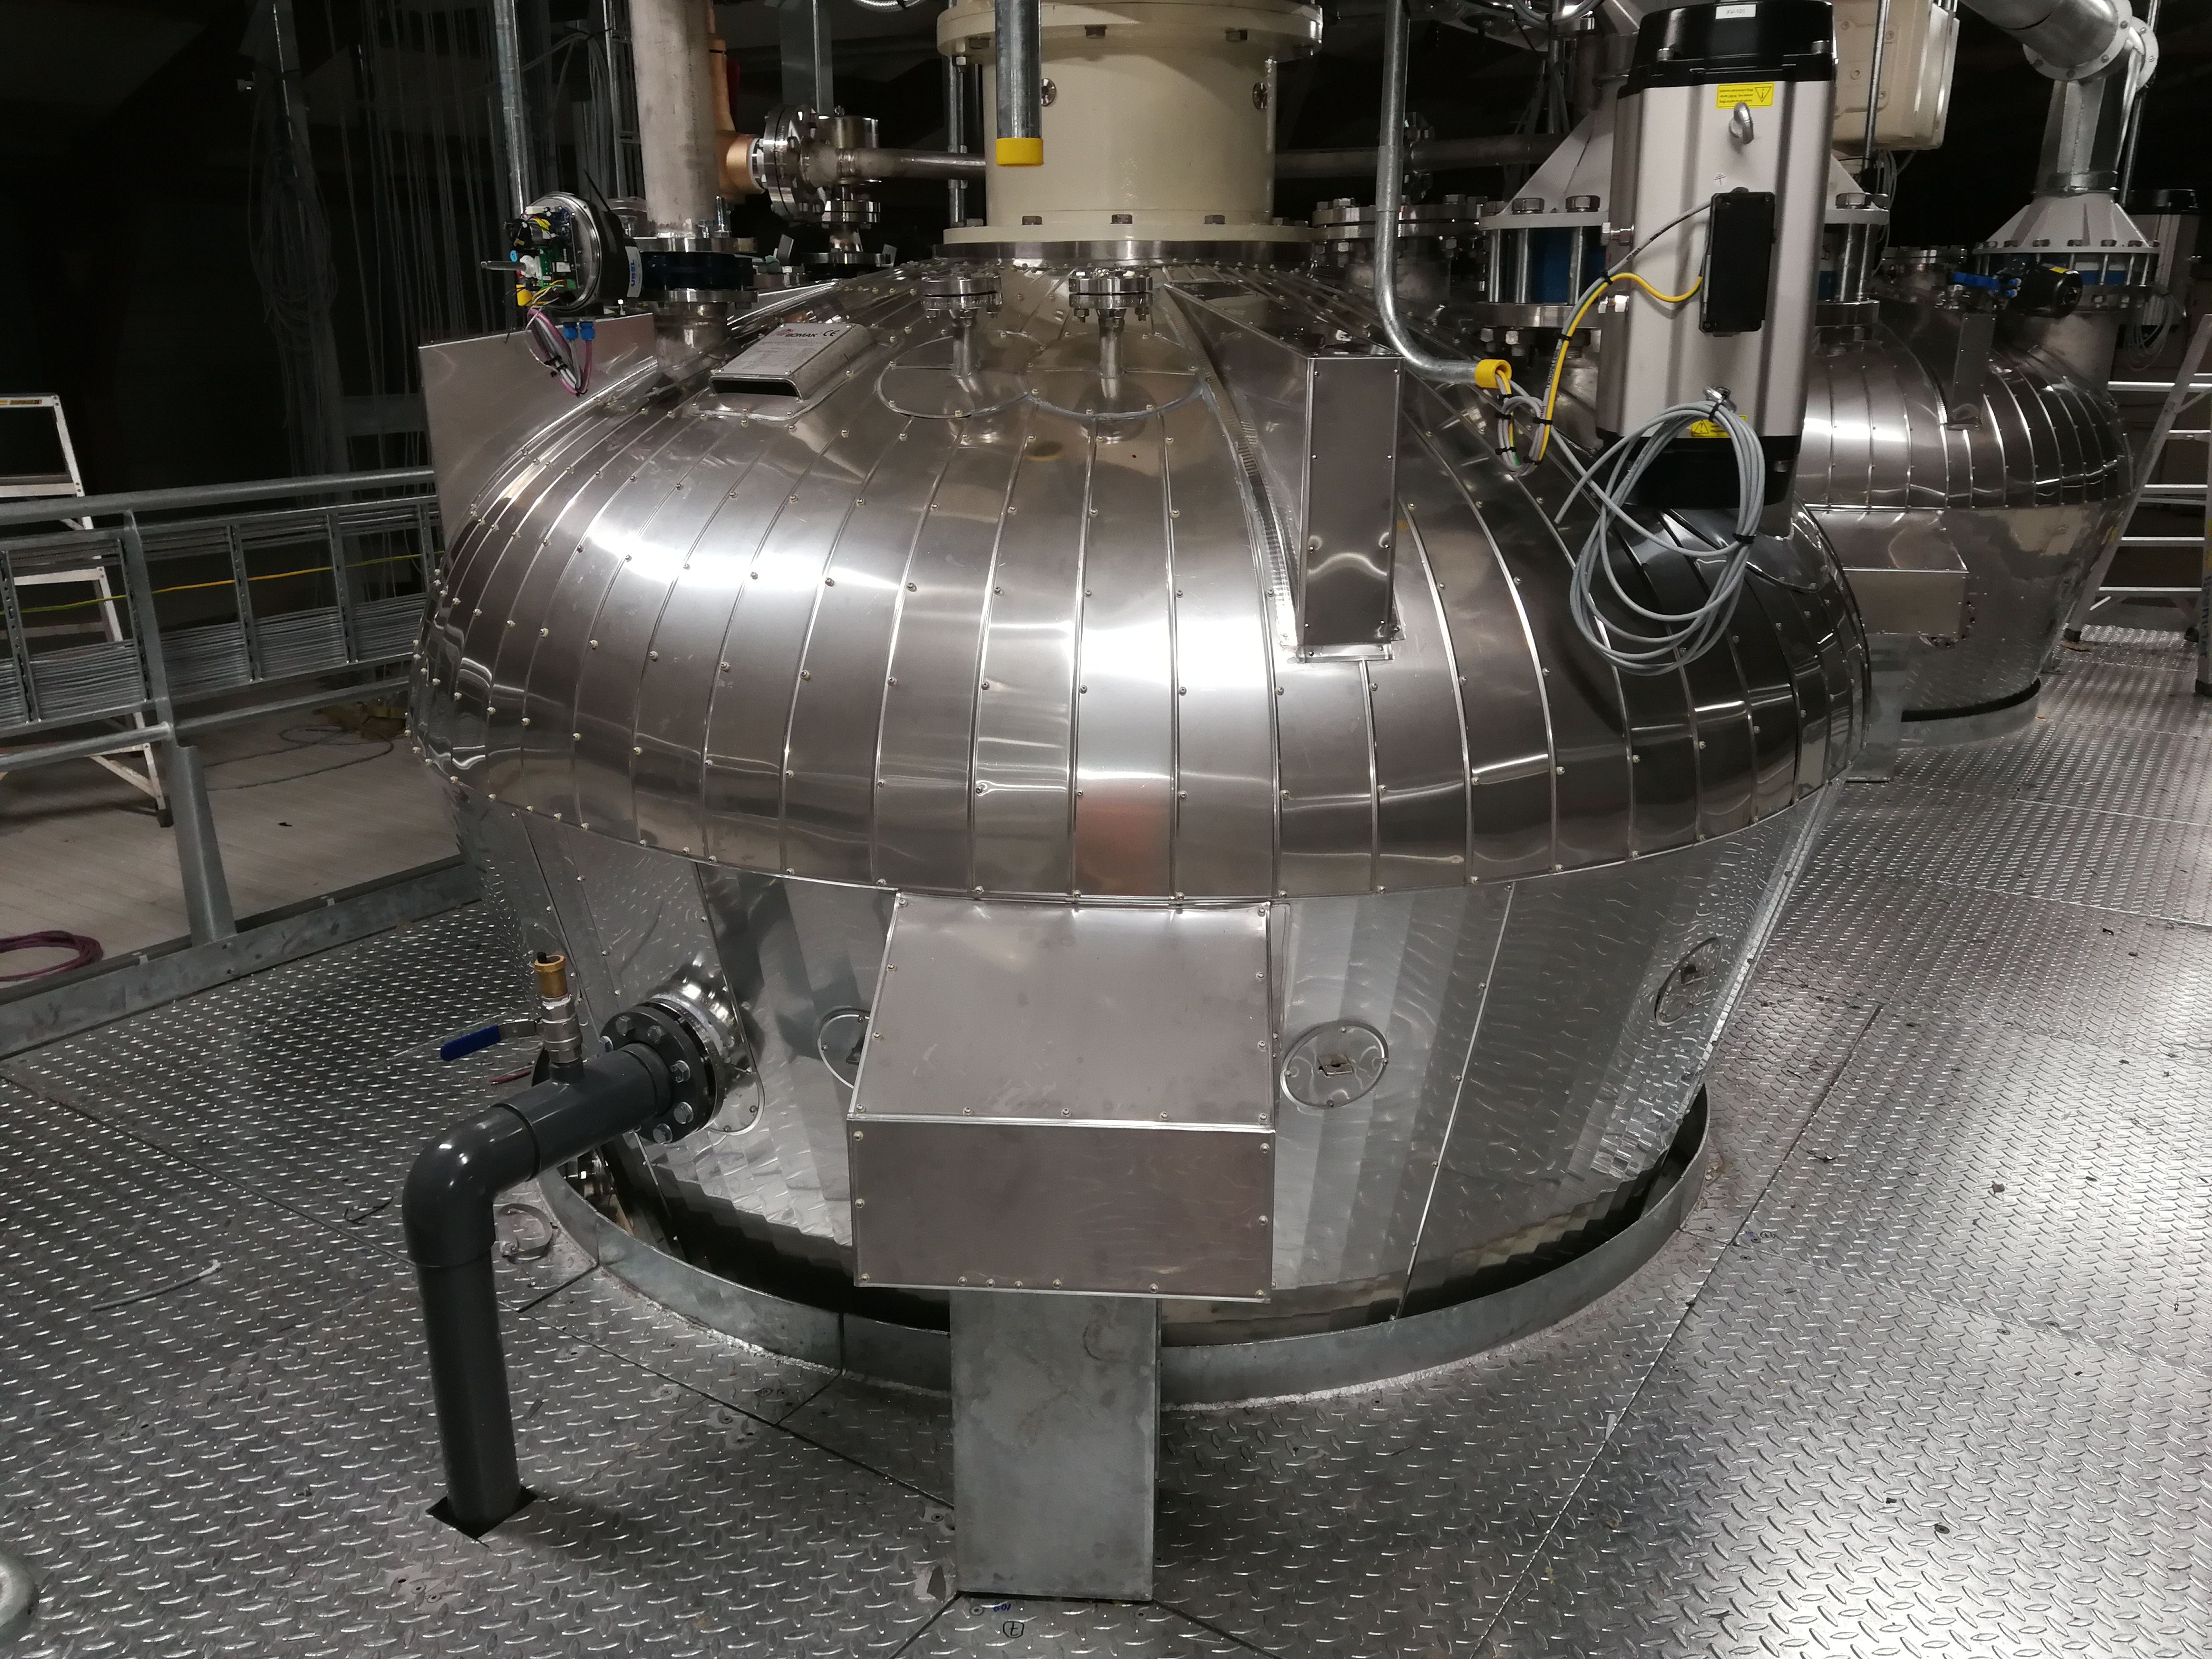 Thermal insulation of steam jacketed mixers